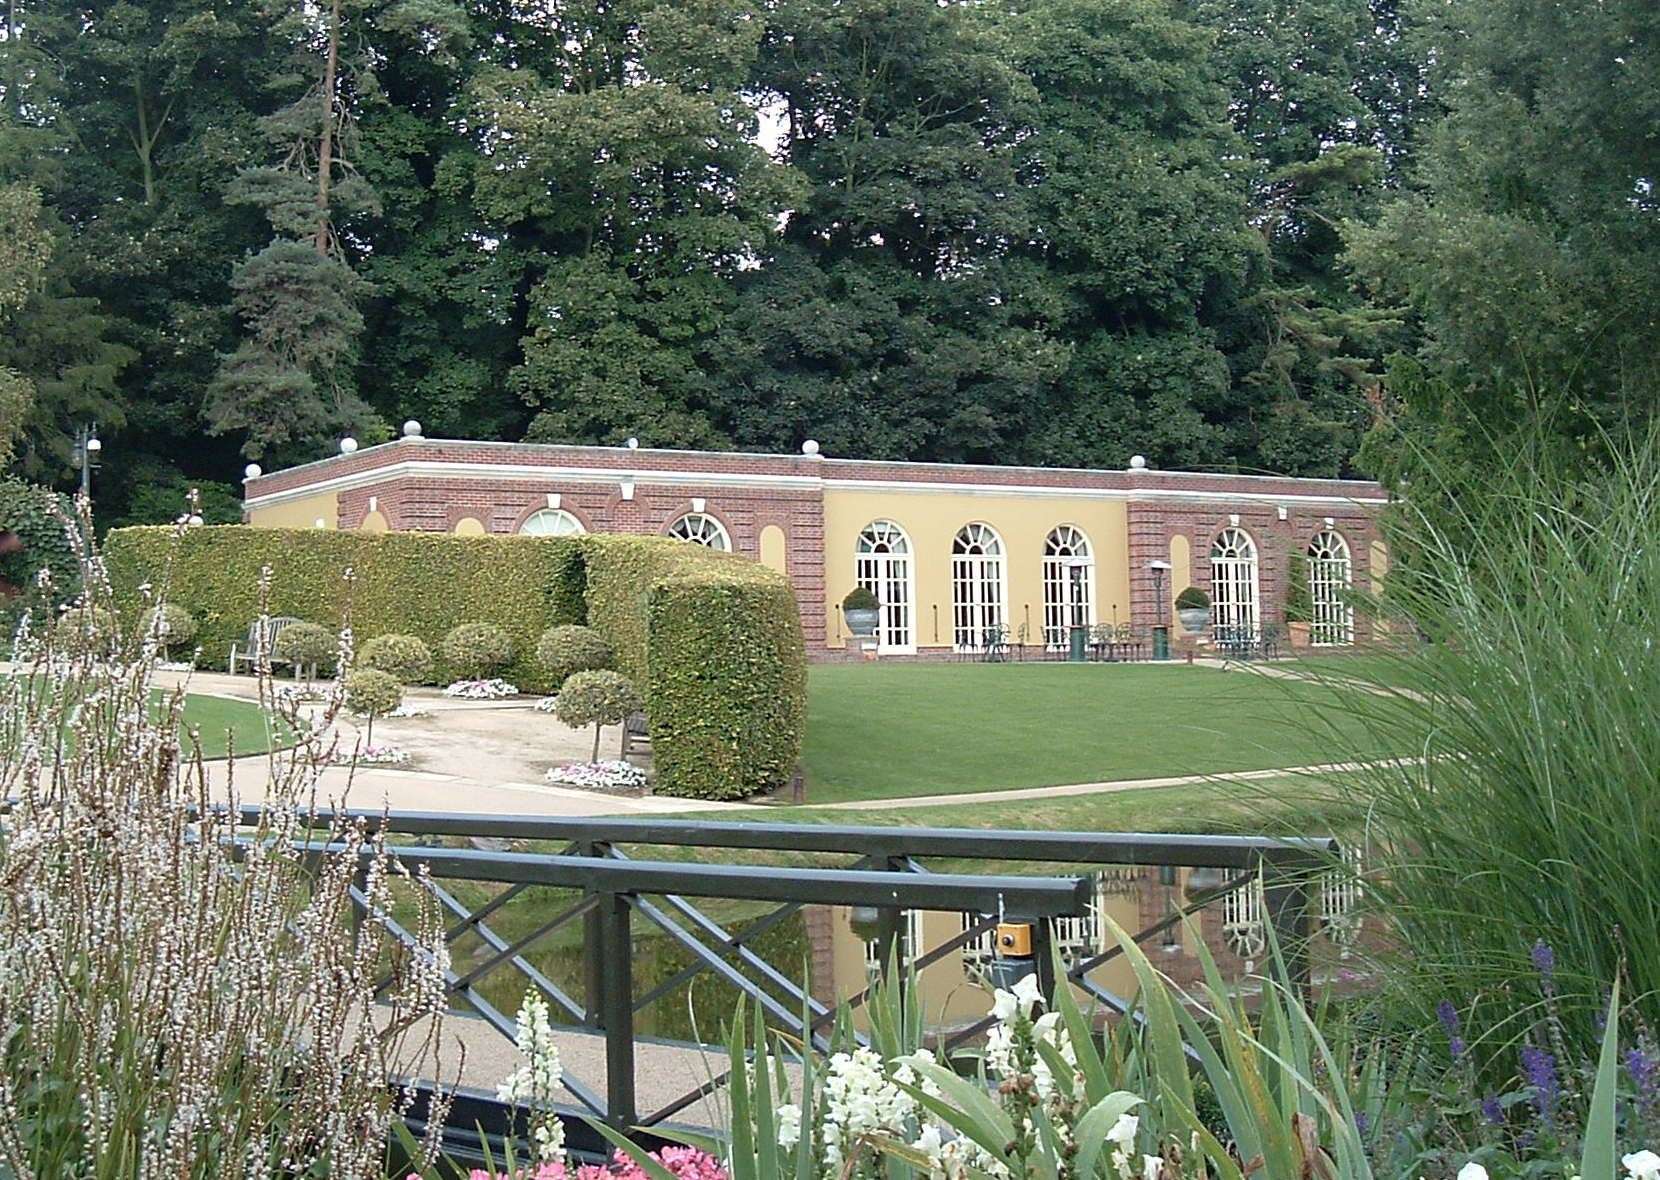 The event will take place at The Orangery at Turkey Mill, Maidstone